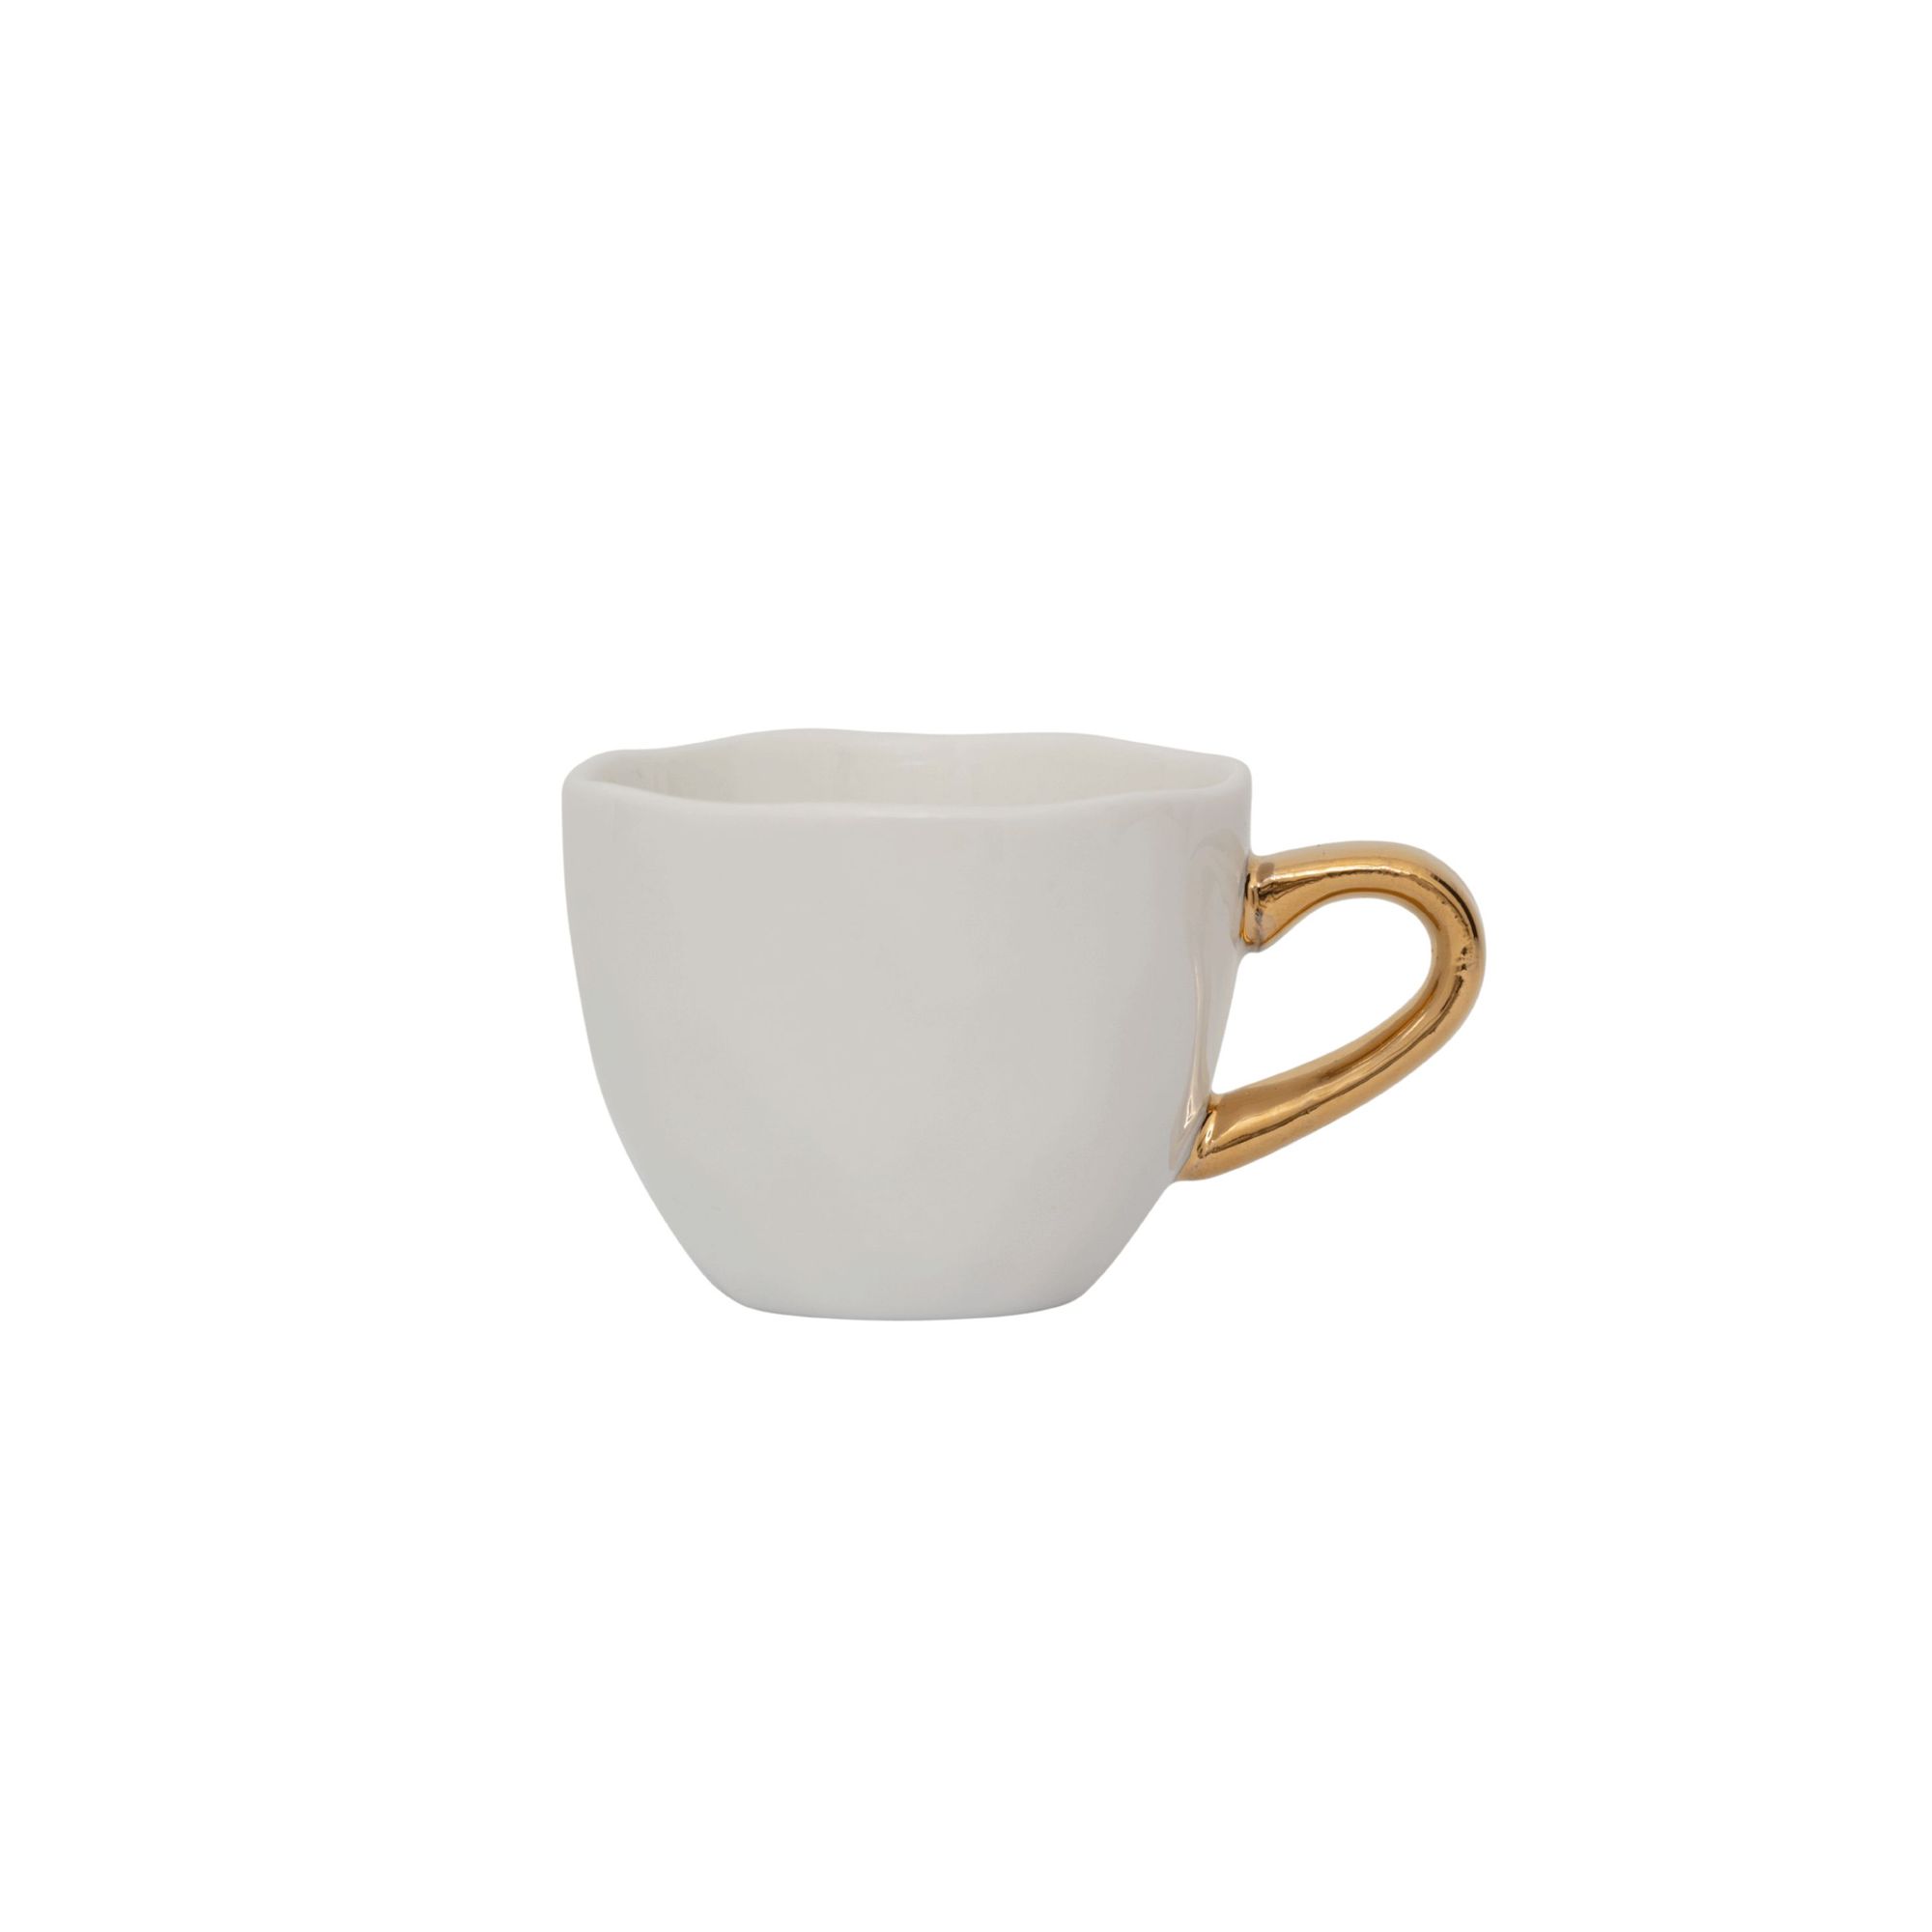 Unc Good Morning Cup Espresso White Gift